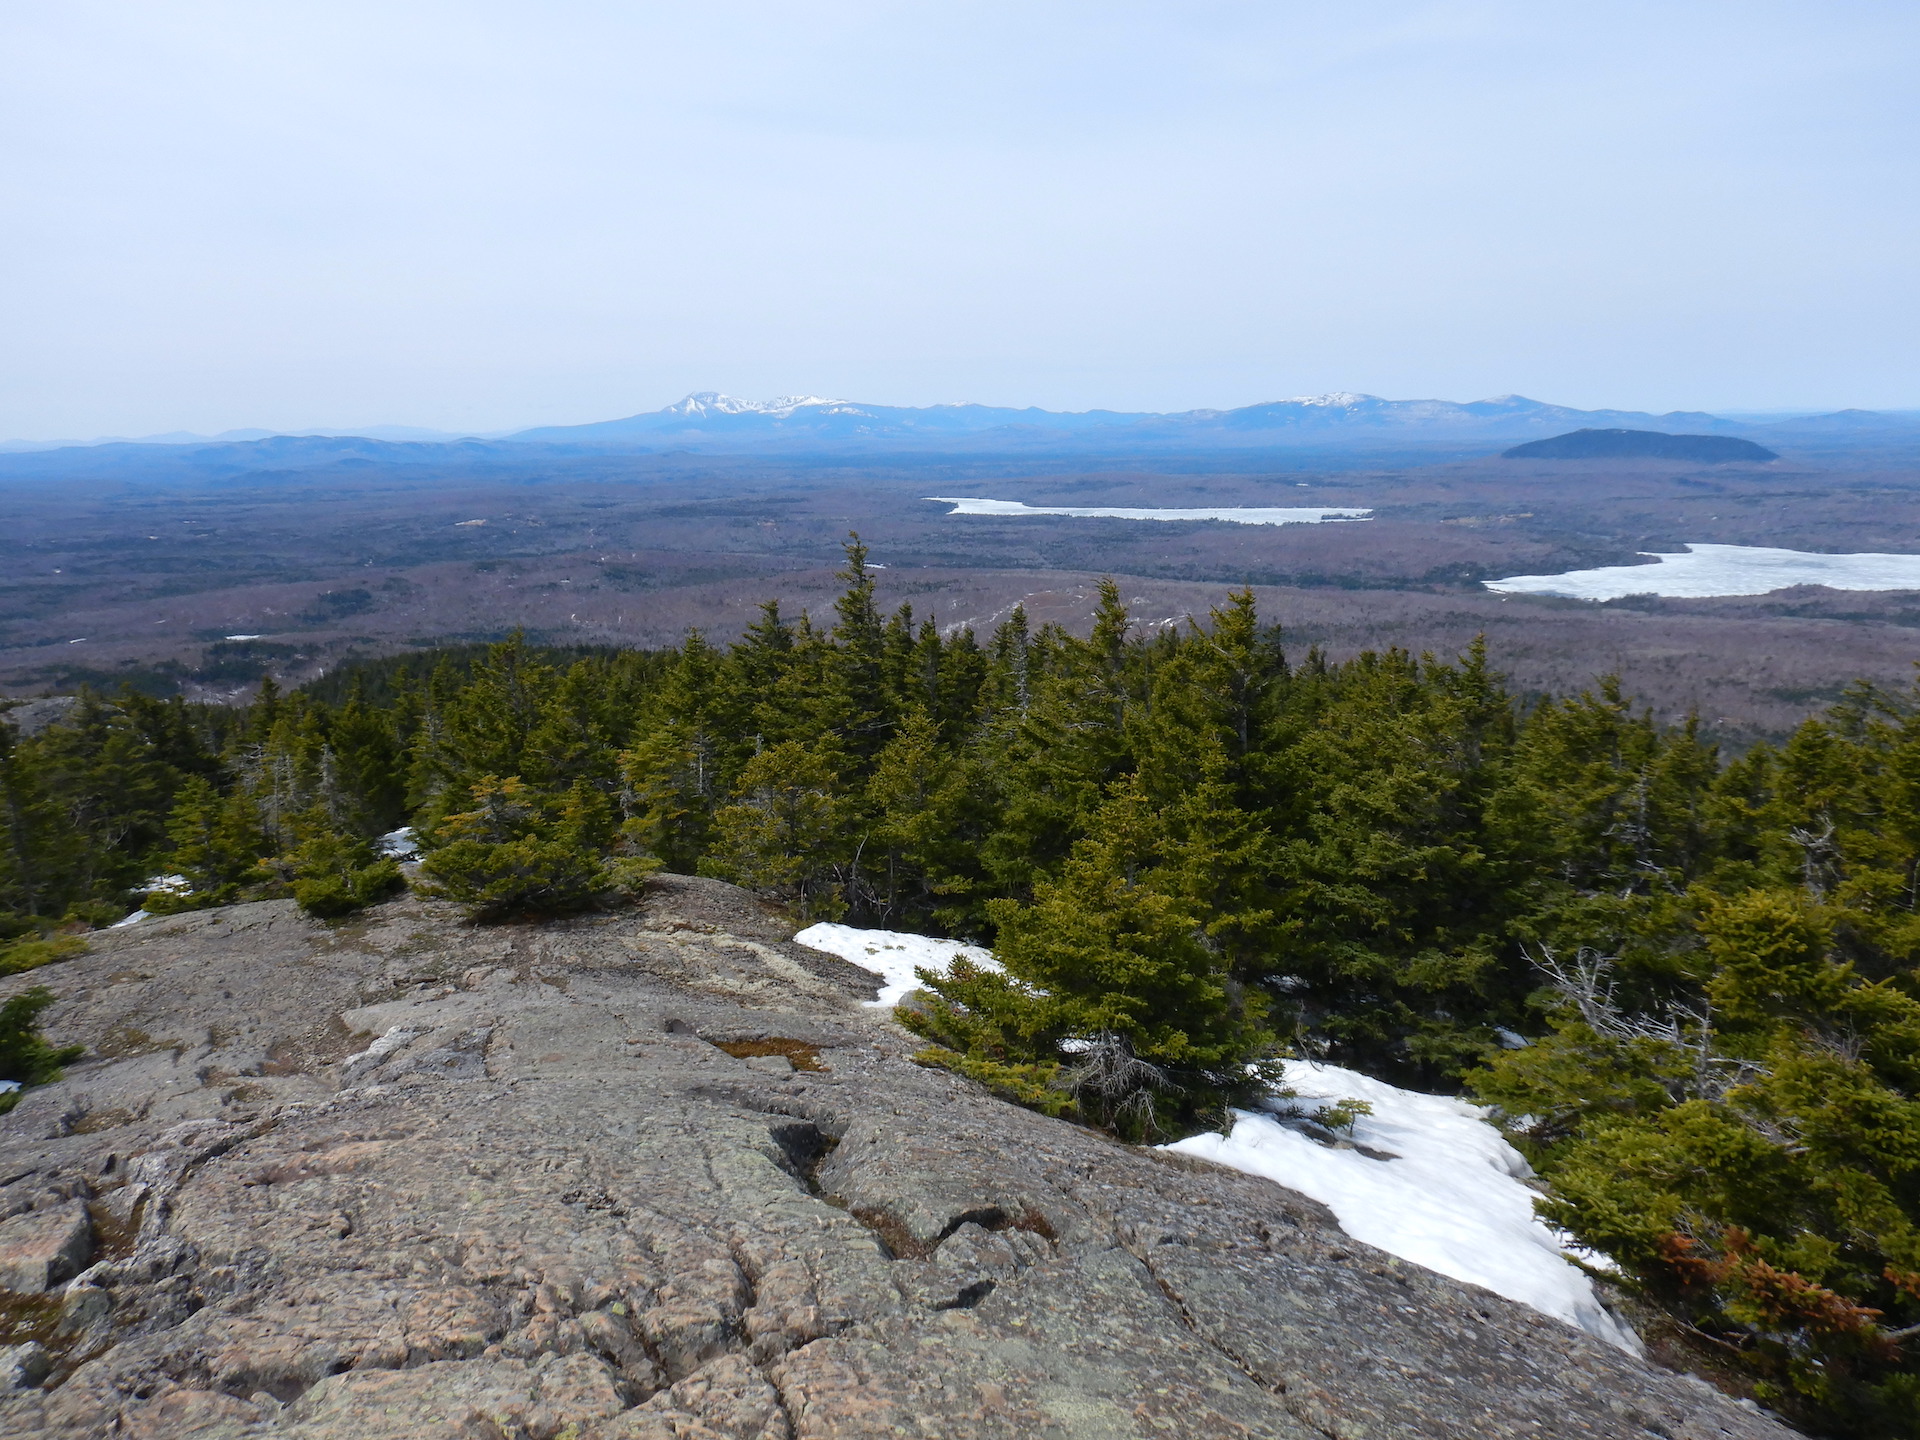 View from a mountain of a forested landscape. A ridge of large snow capped mountains form the horizon, although they appear small in the photo. Snow covered trees form the foreground just above windswept rock. Frozen ponds and forest fill the middle ground.